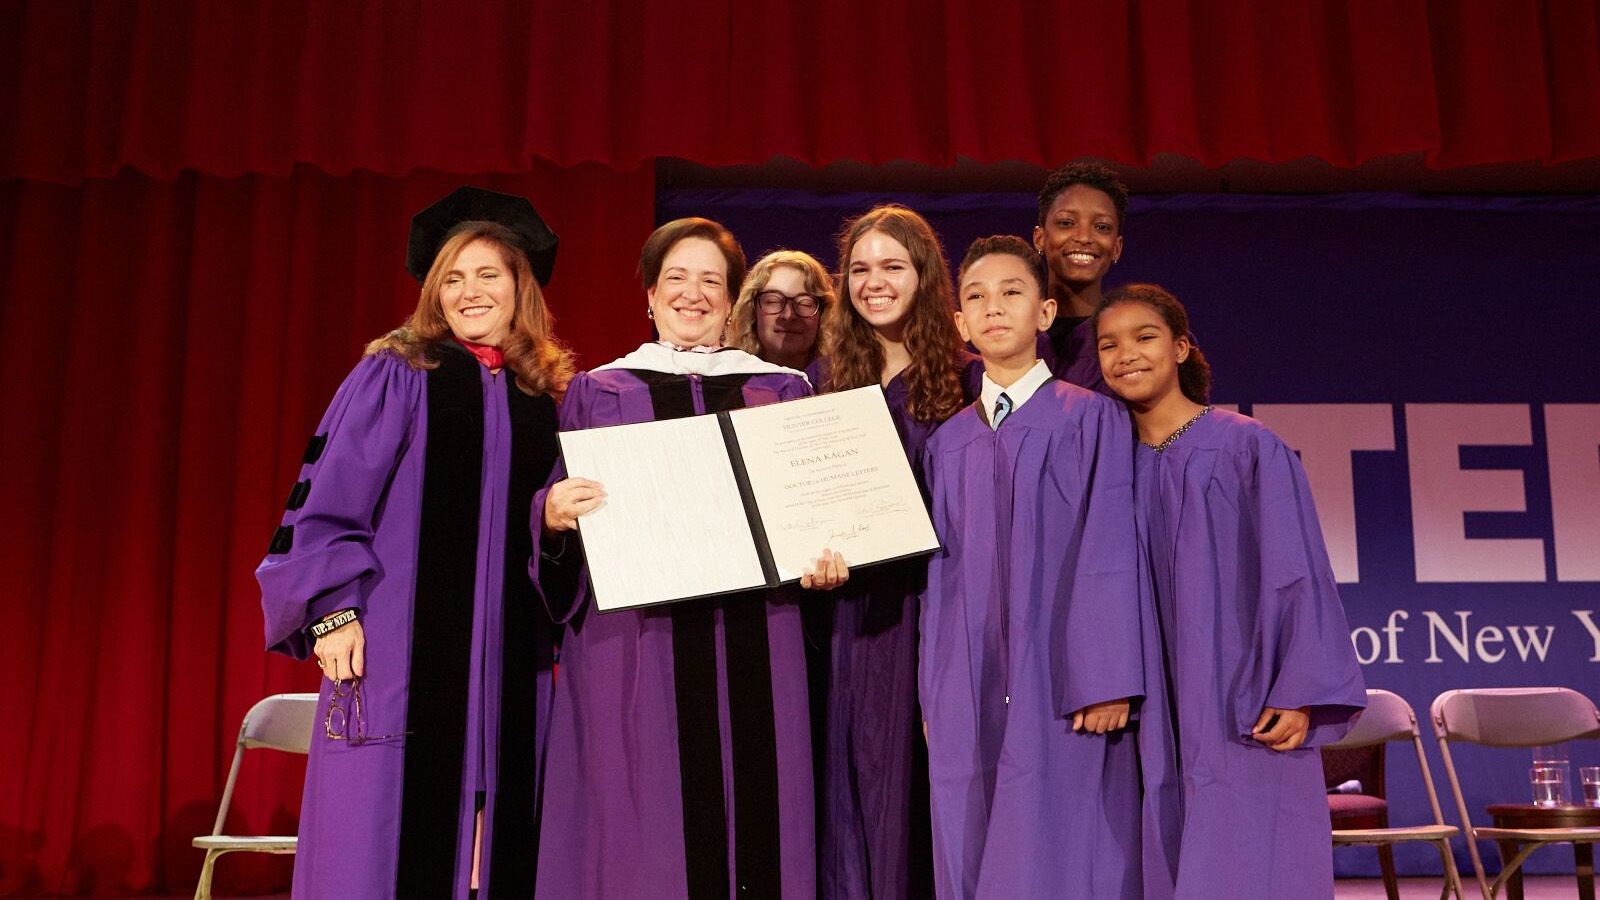 Supreme Court Justice Elena Kagan with students after receiving the honorary Doctorate of Humane Letters